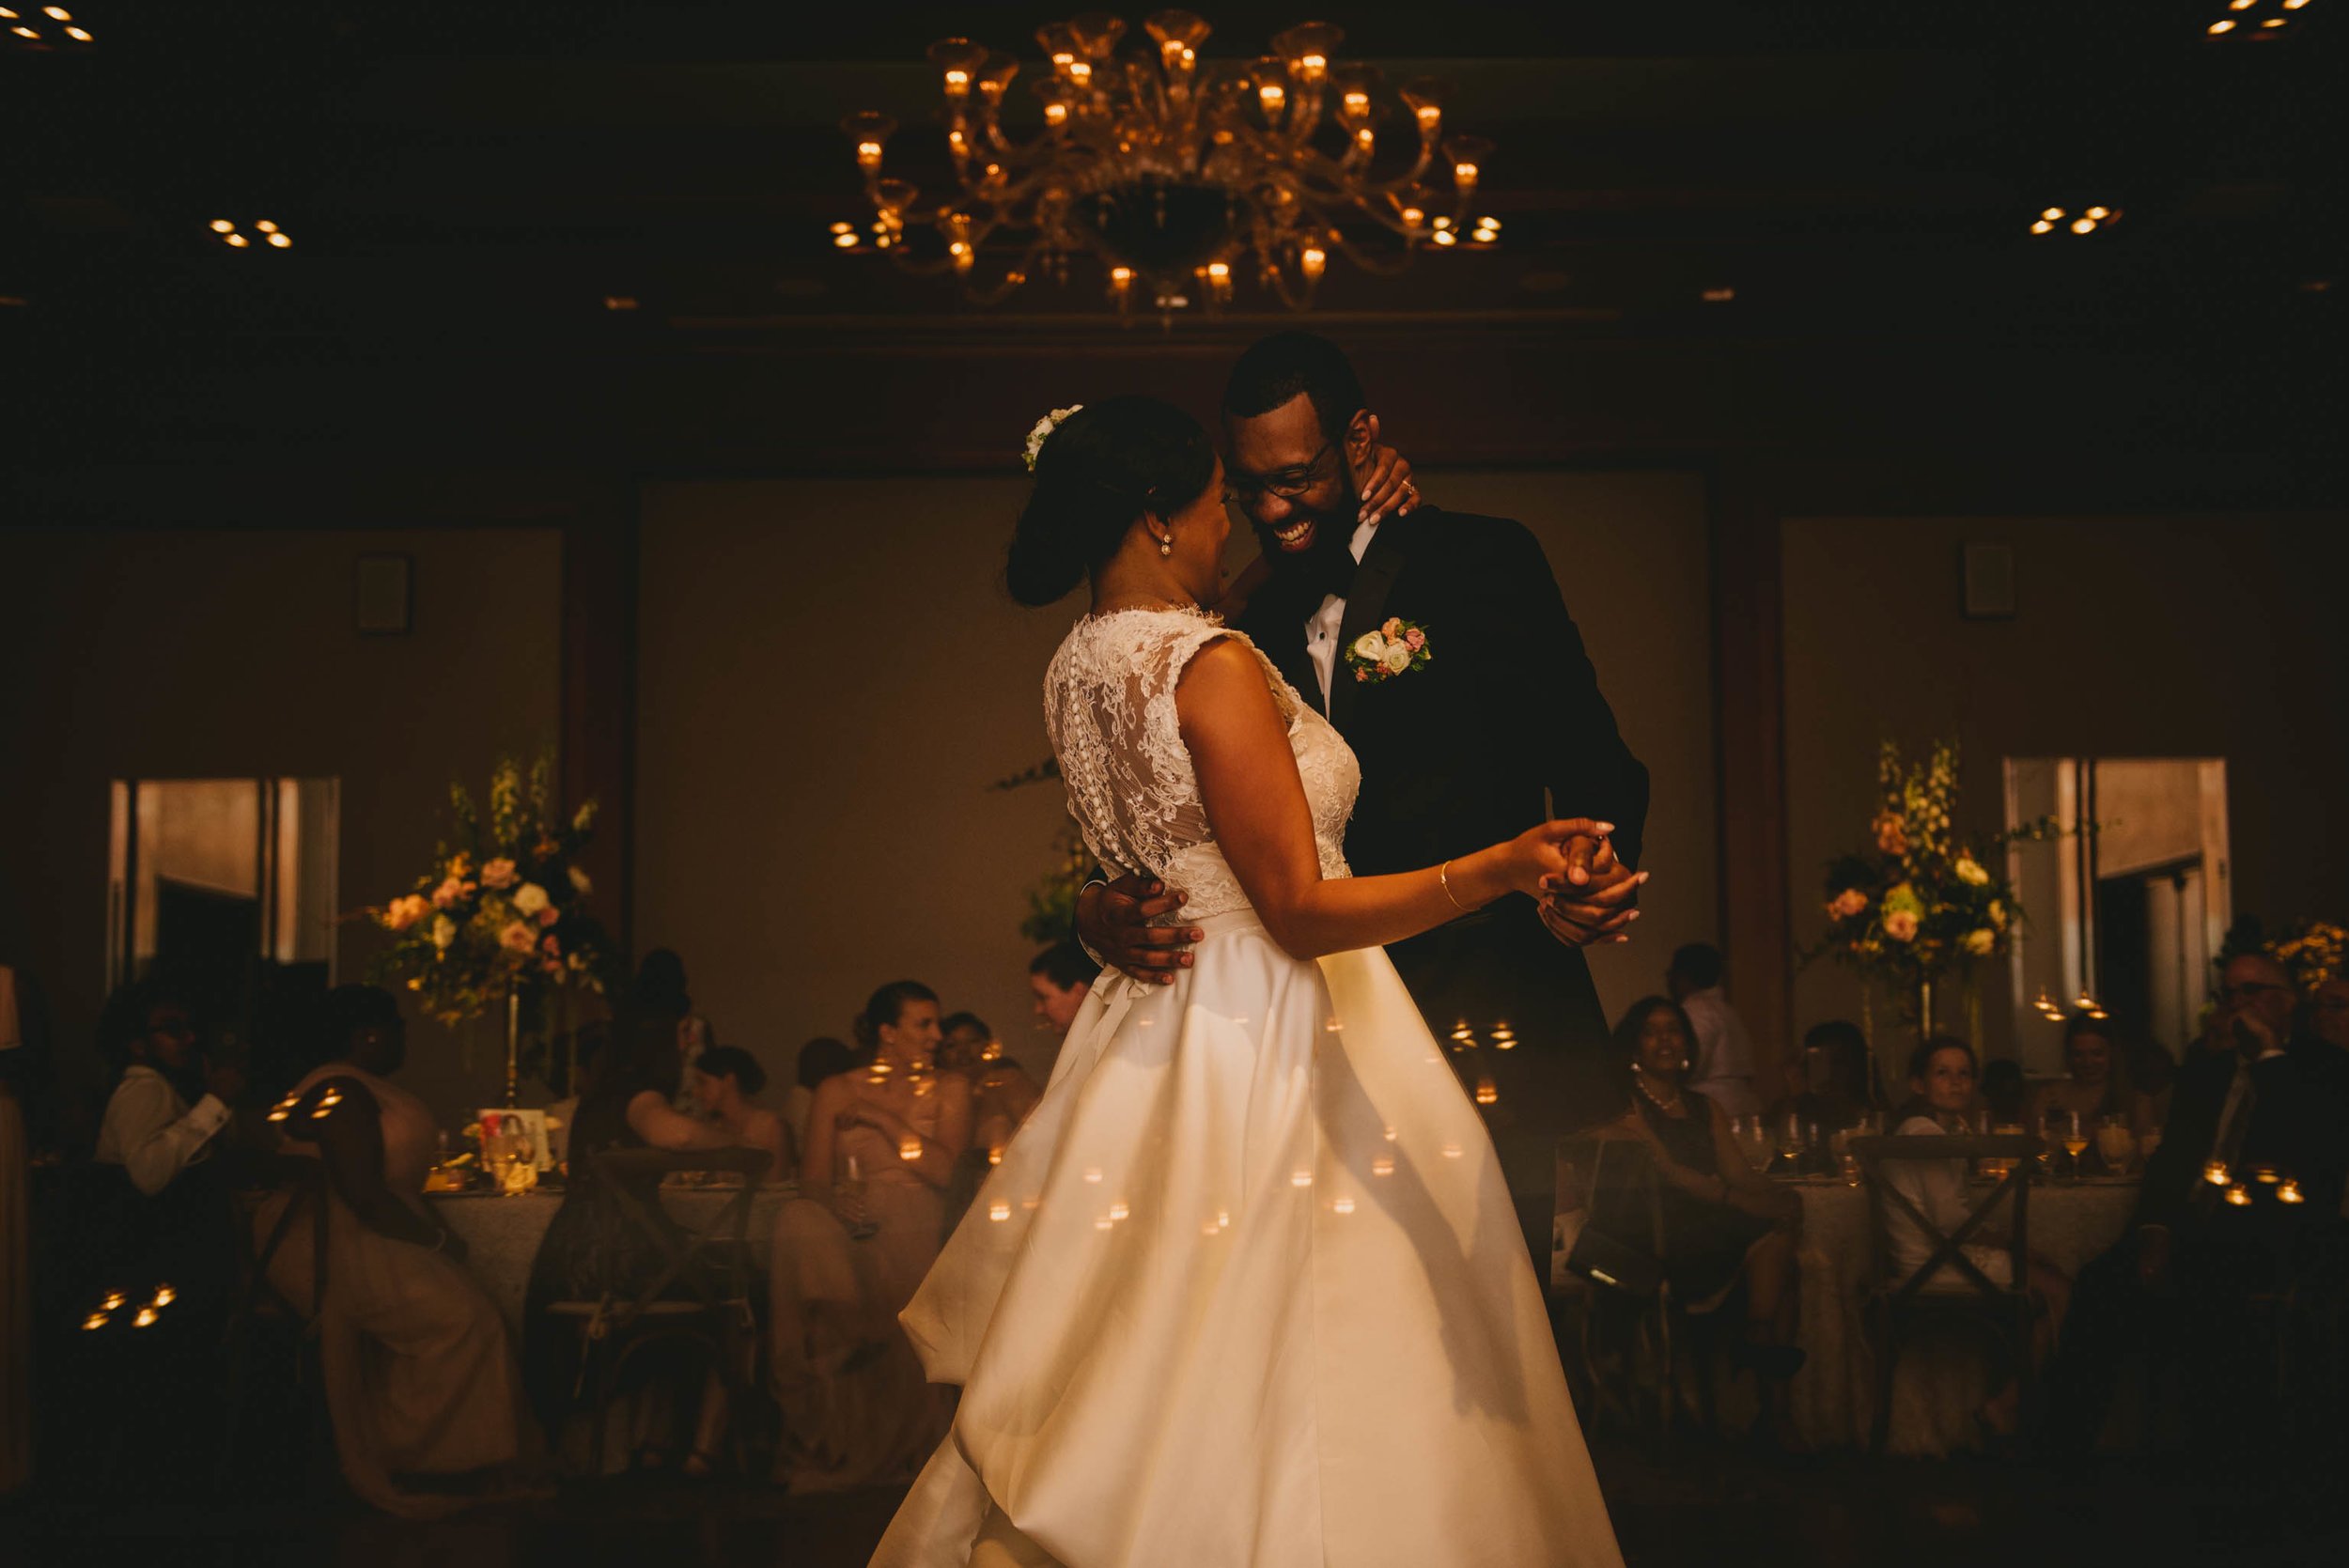 The bride and groom enjoying their first dance during their reception at the Umstead Hotel in Cary, NC